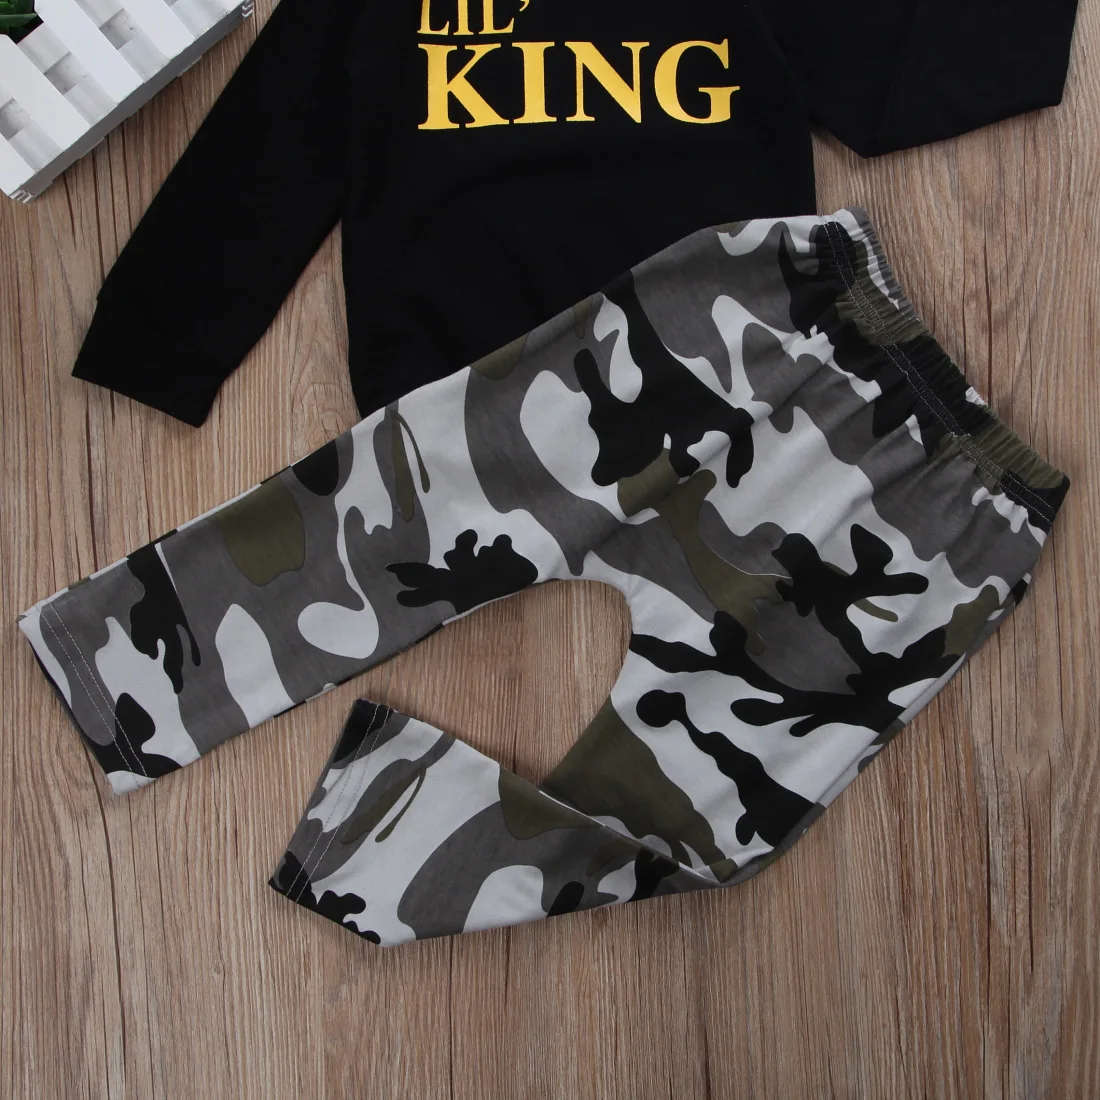 IFFEI Baby Boy’s Outfits Little King Long Sleeve Pullover Top with Camouflage Pants Two Pieces Outfits Set for Toddler Boys